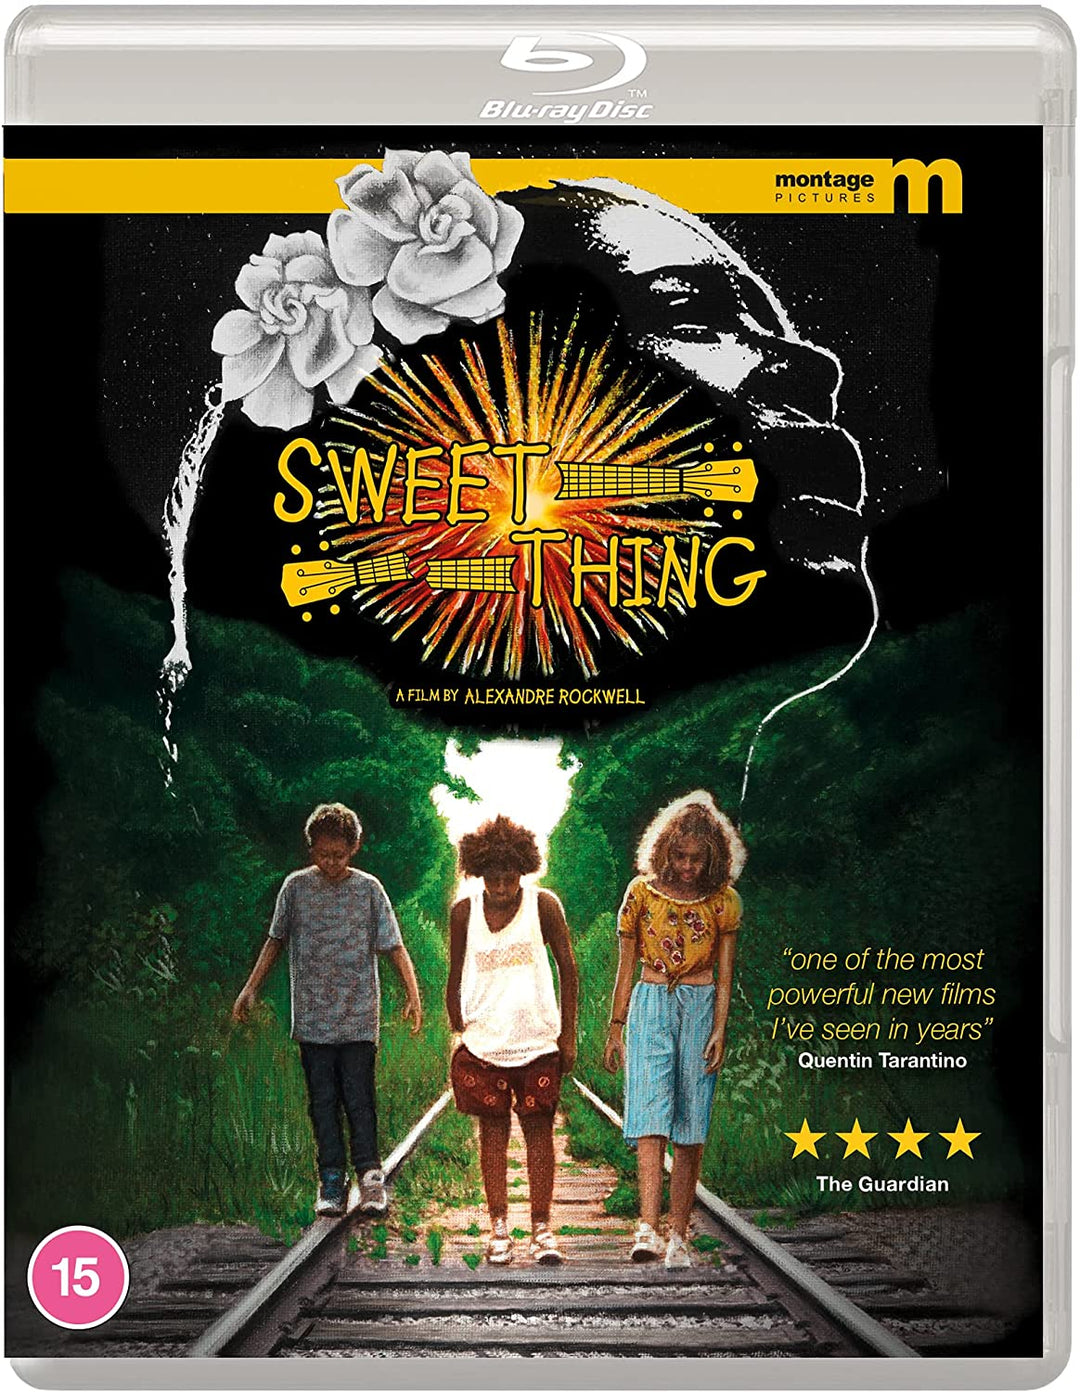 SWEET THING (Montage Pictures) Blu-ray